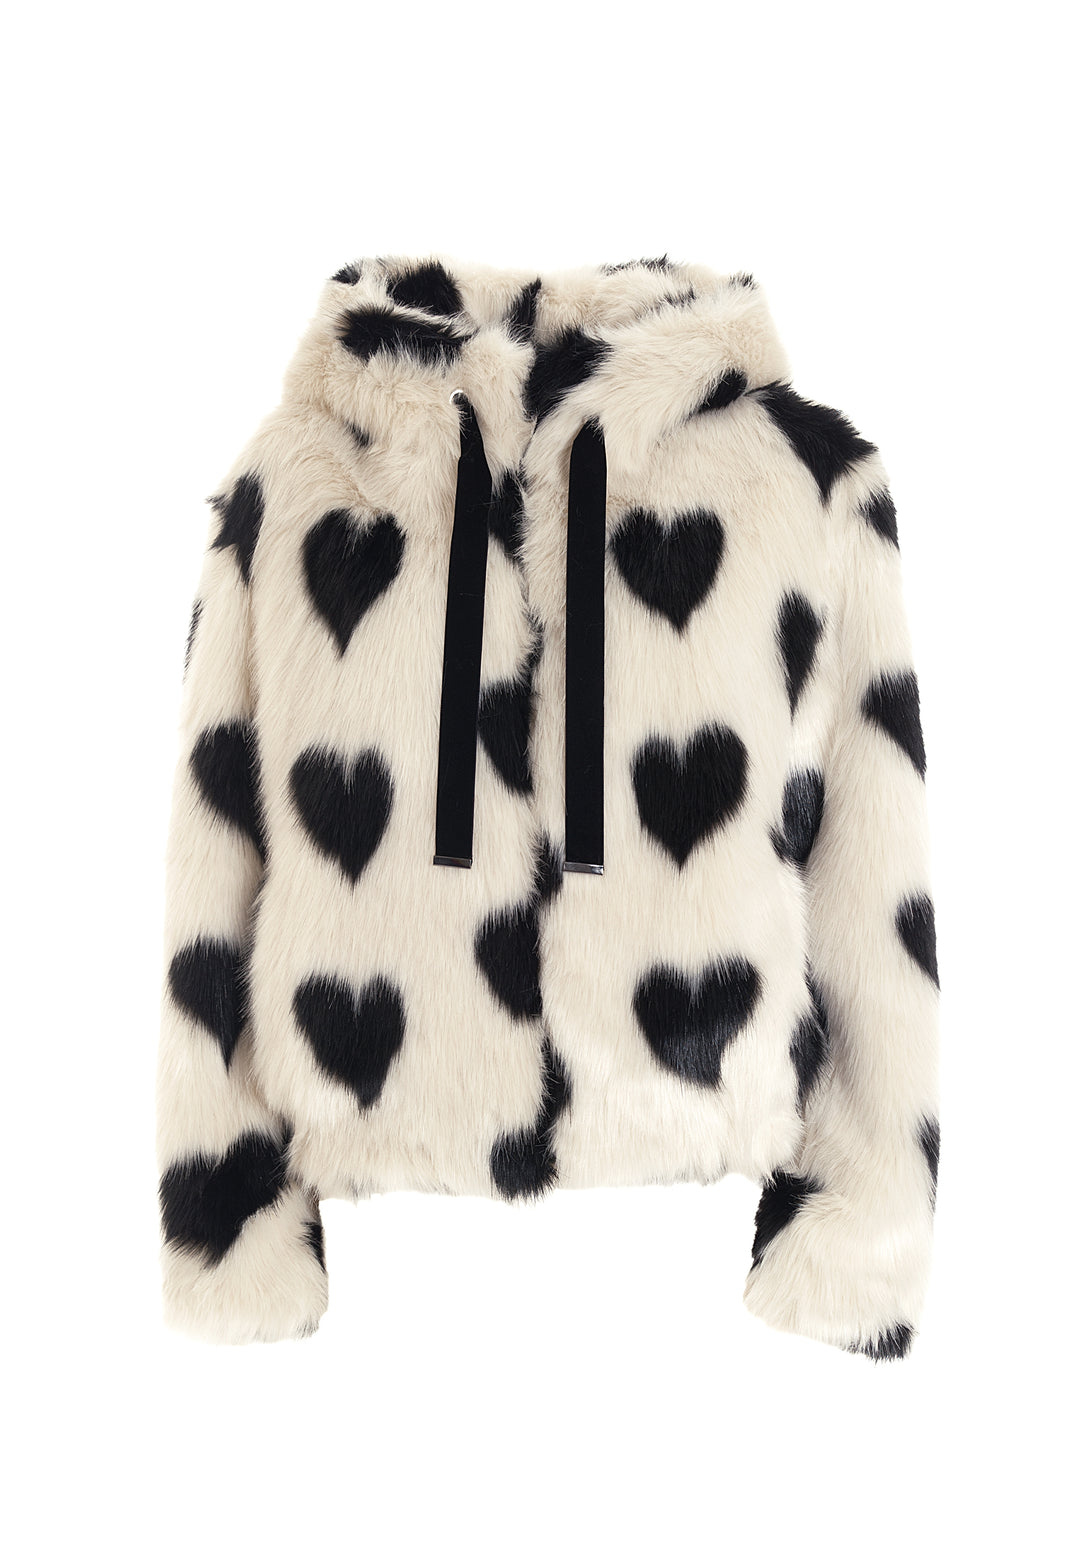 Jacket over fit made in eco fur with heart shape pattern